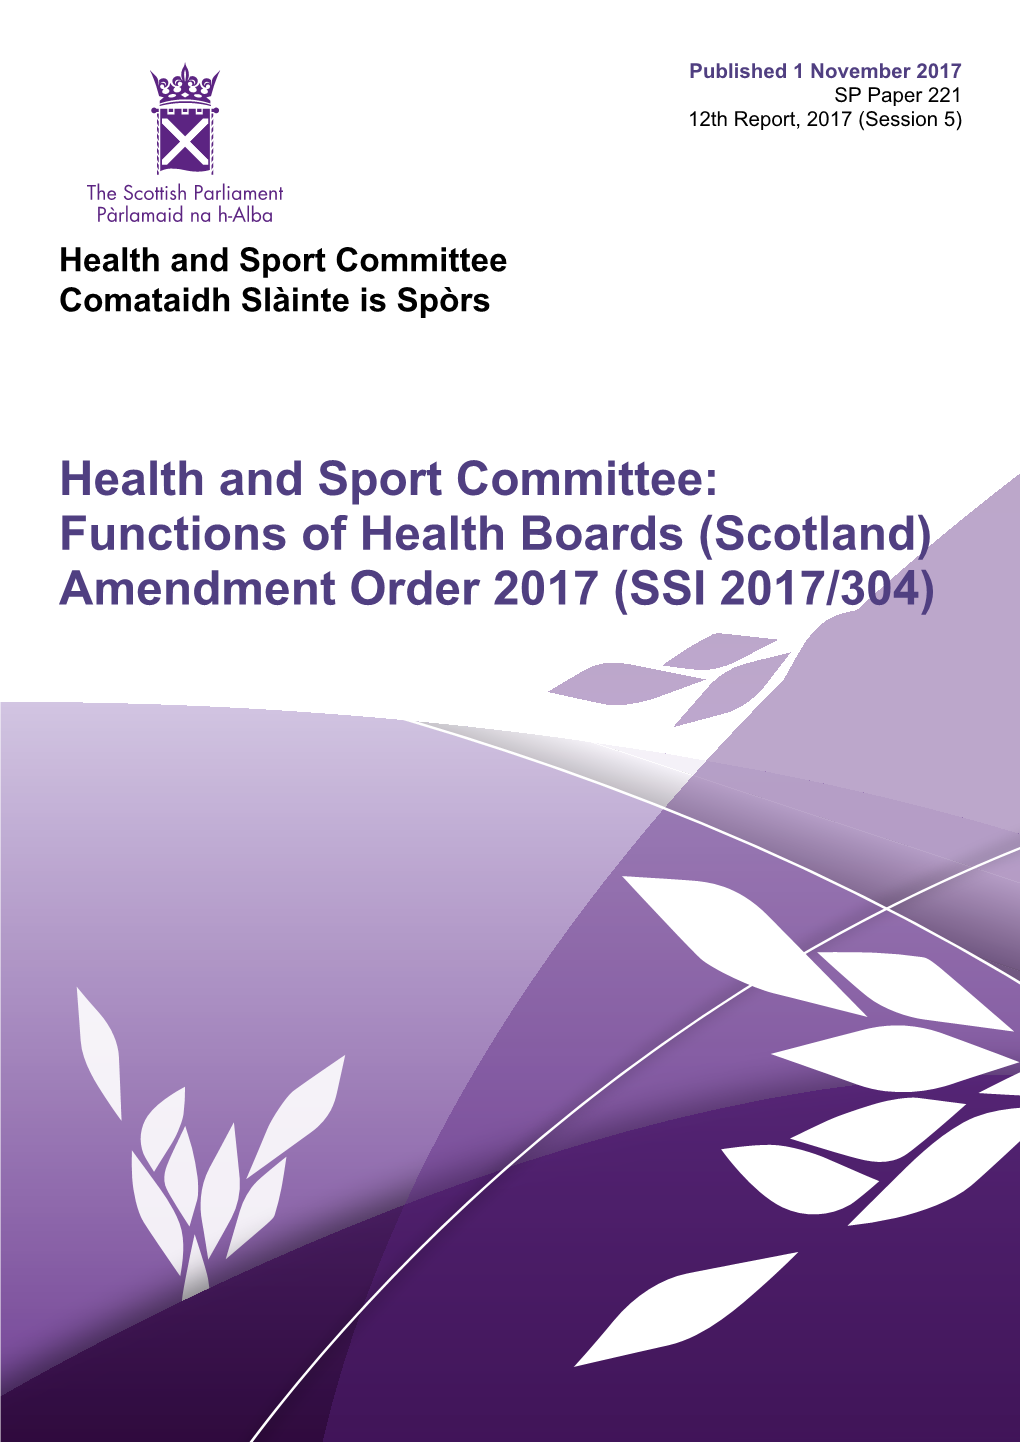 Functions of Health Boards (Scotland) Amendment Order 2017 (SSI 2017/304) Published in Scotland by the Scottish Parliamentary Corporate Body